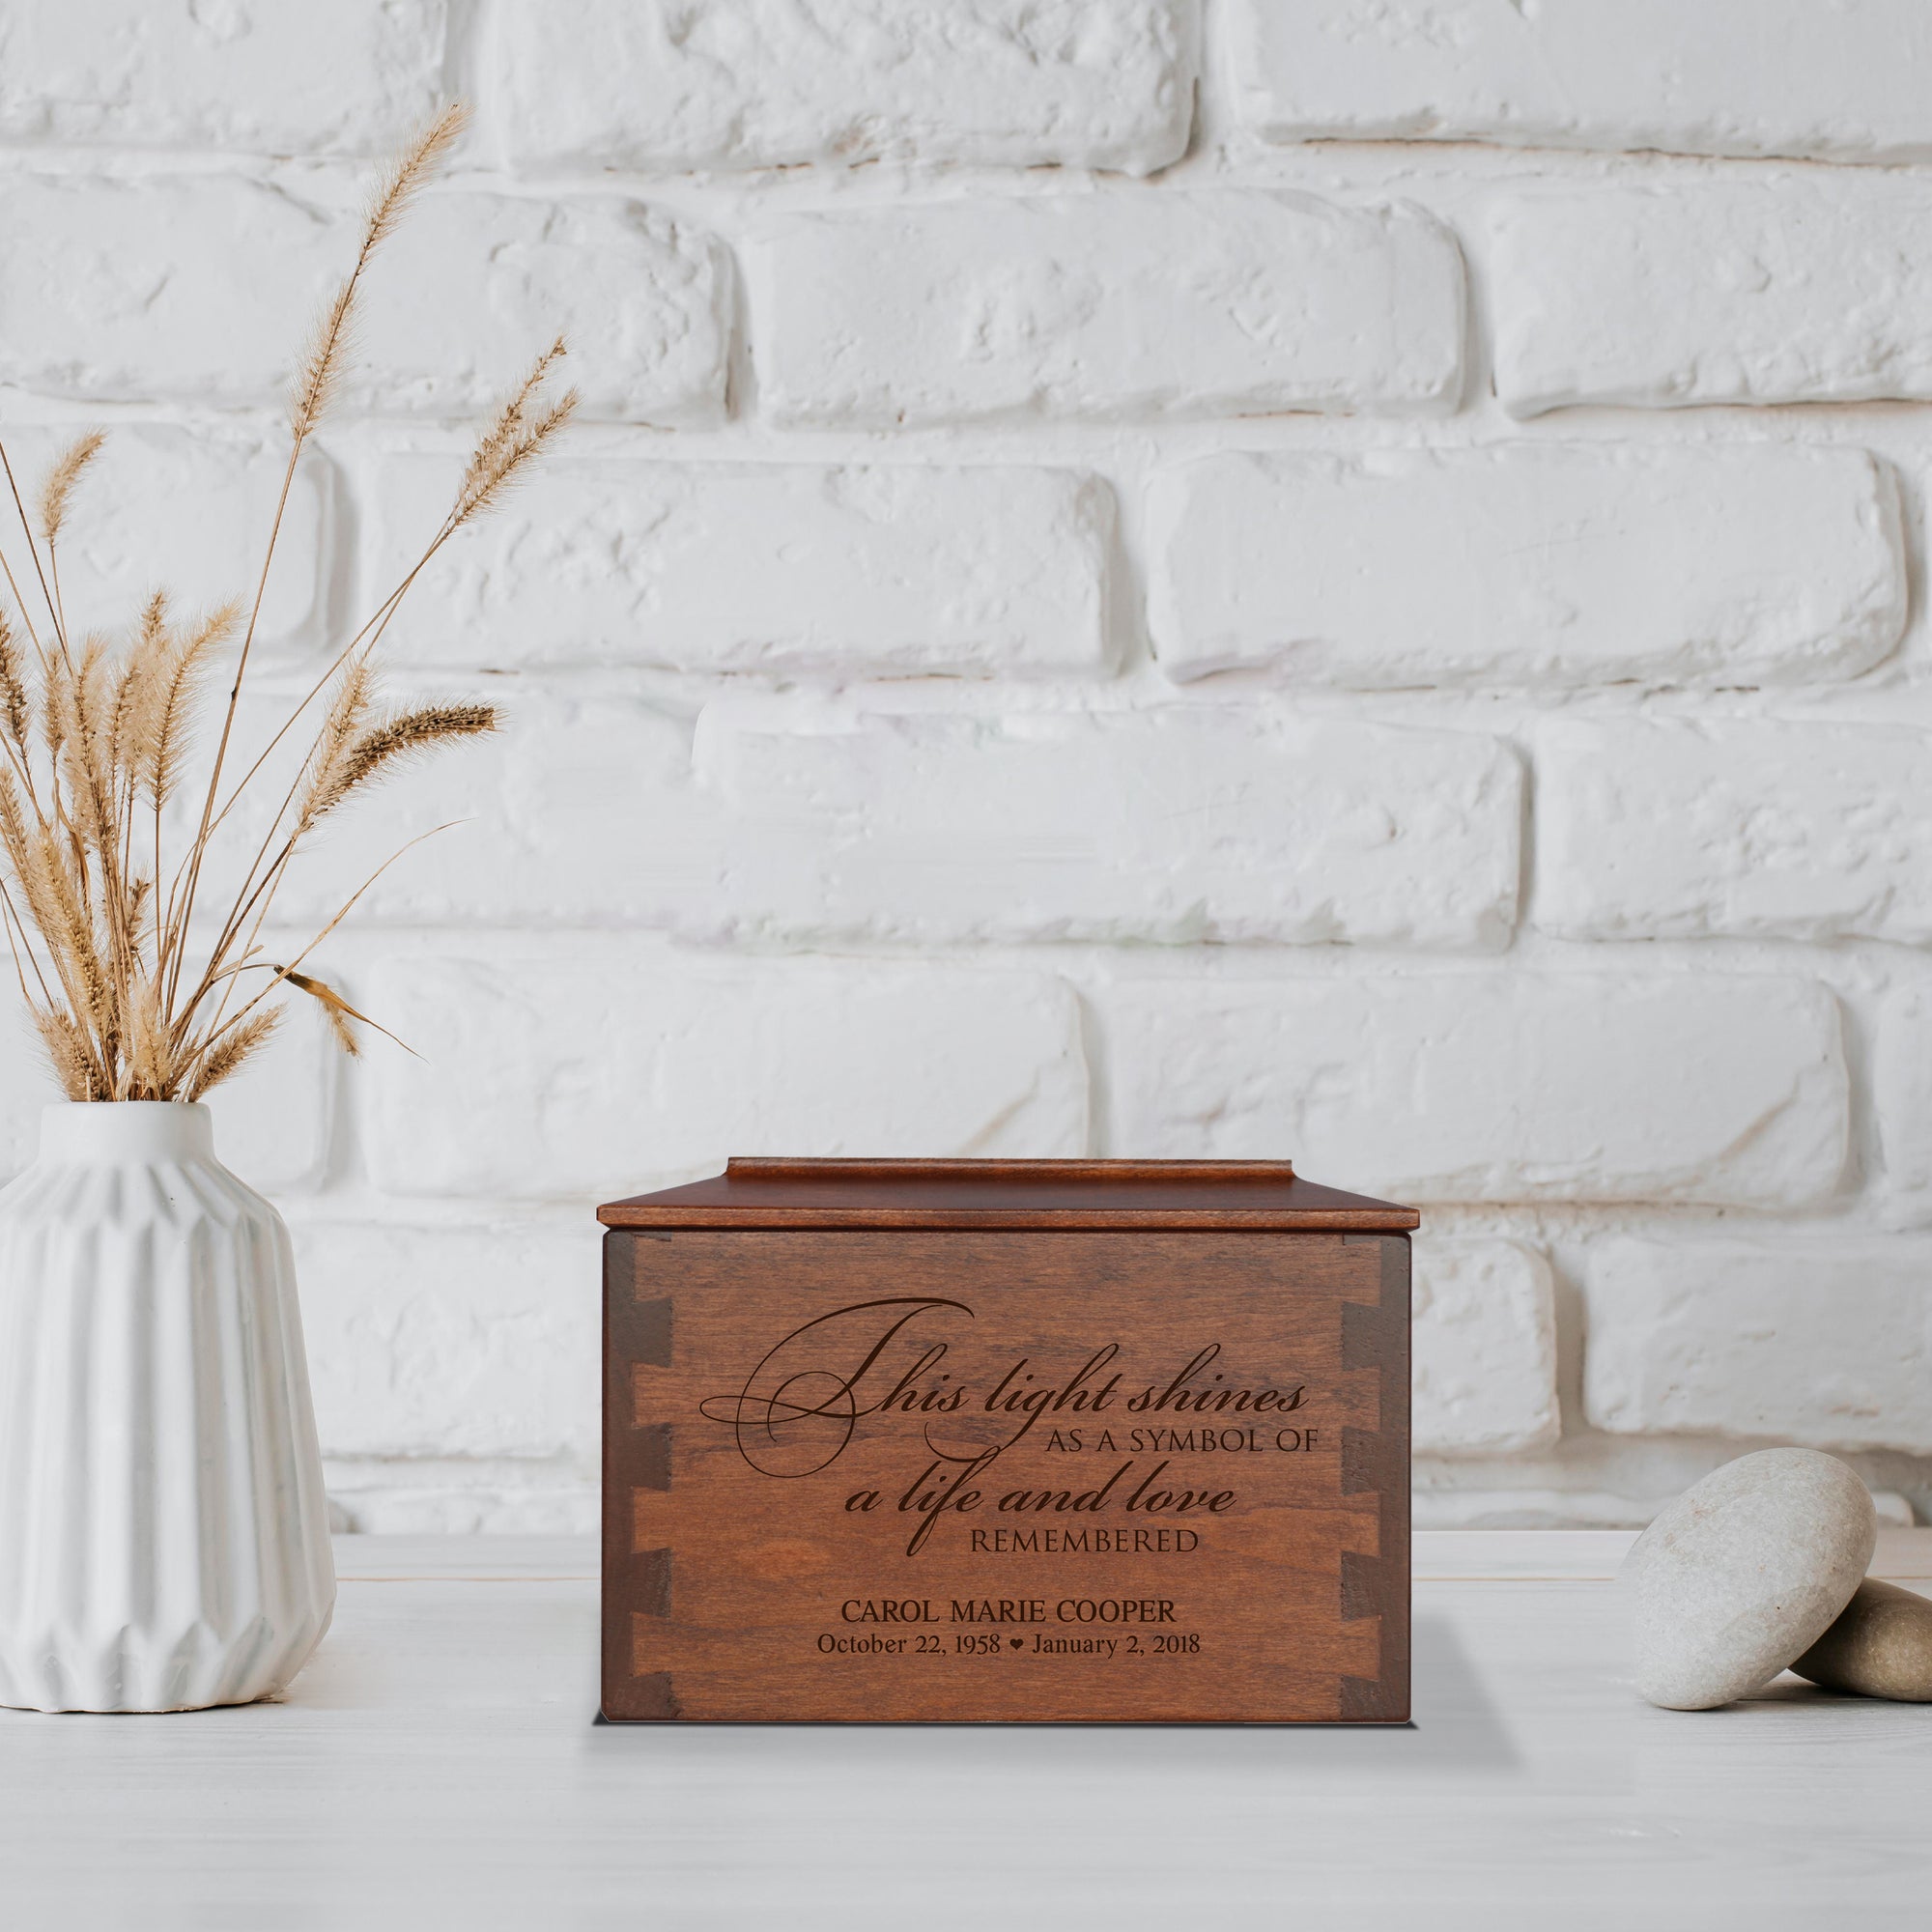 This Light Shines Personalized Memorial Decorative Dovetail Cremation Urn For Human Ashes Funeral and Condolence Keepsake